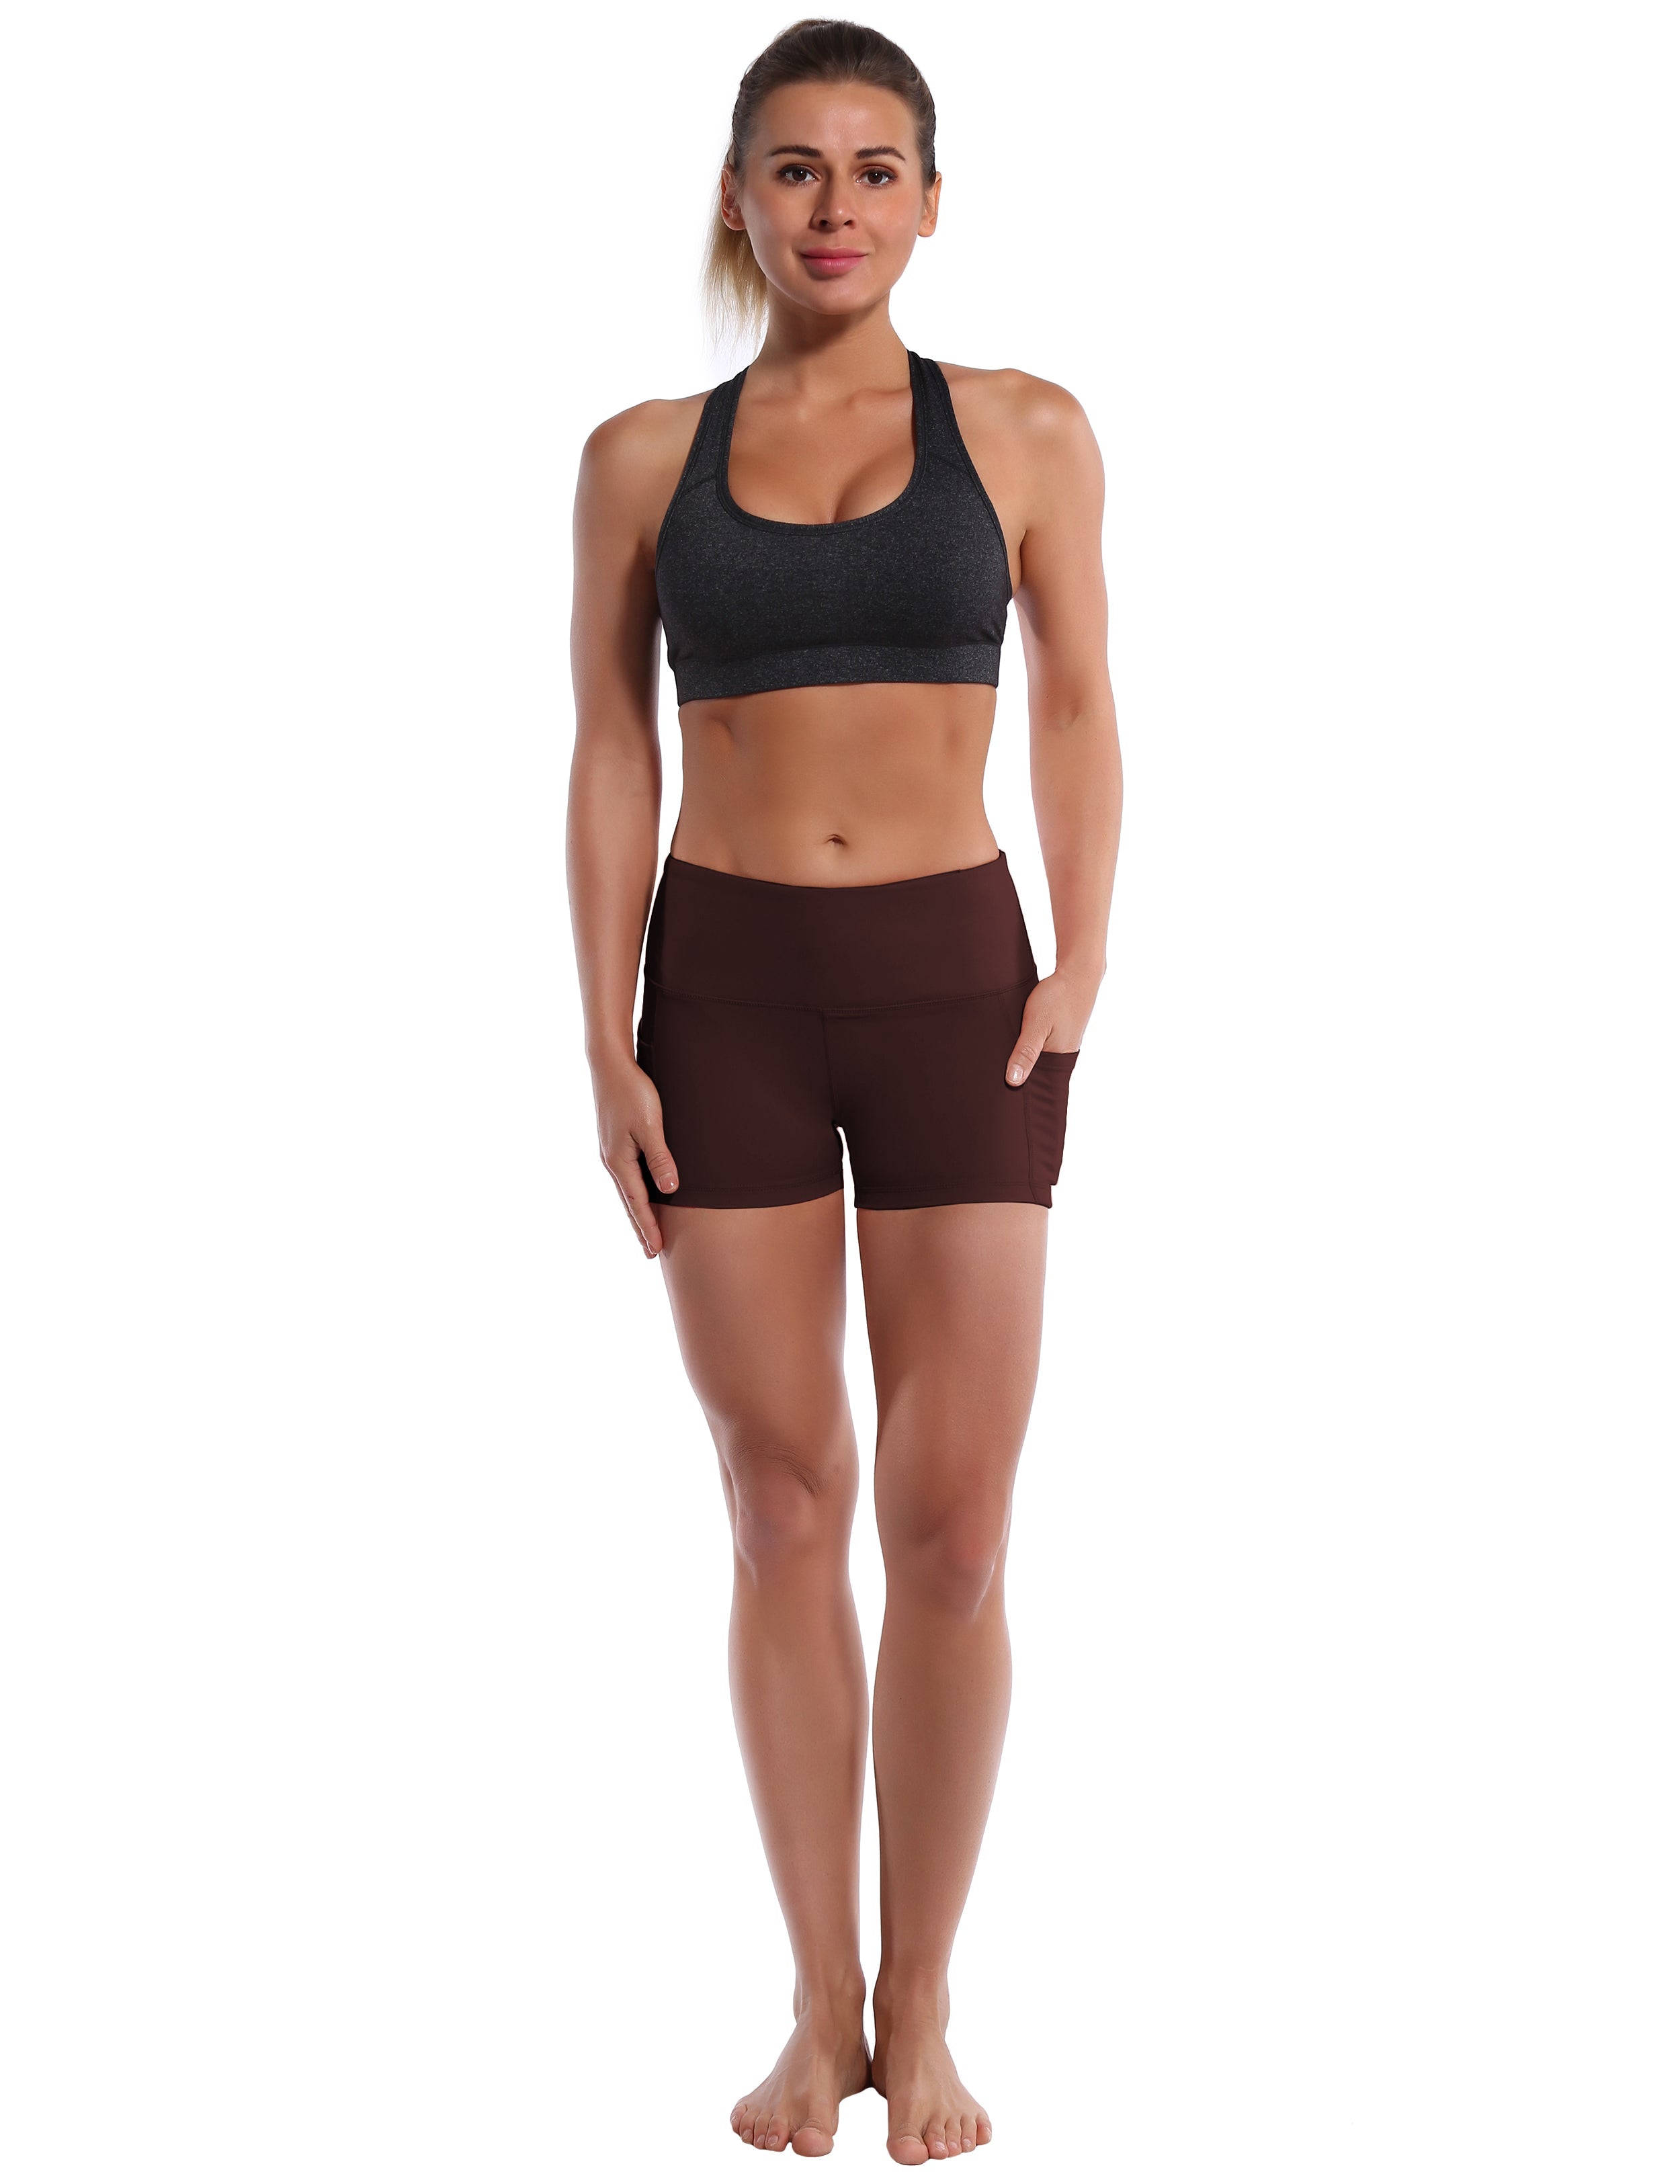 2.5" Side Pockets Golf Shorts mahoganymaroon Sleek, soft, smooth and totally comfortable: our newest sexy style is here. Softest-ever fabric High elasticity High density 4-way stretch Fabric doesn't attract lint easily No see-through Moisture-wicking Machine wash 78% Polyester, 22% Spandex